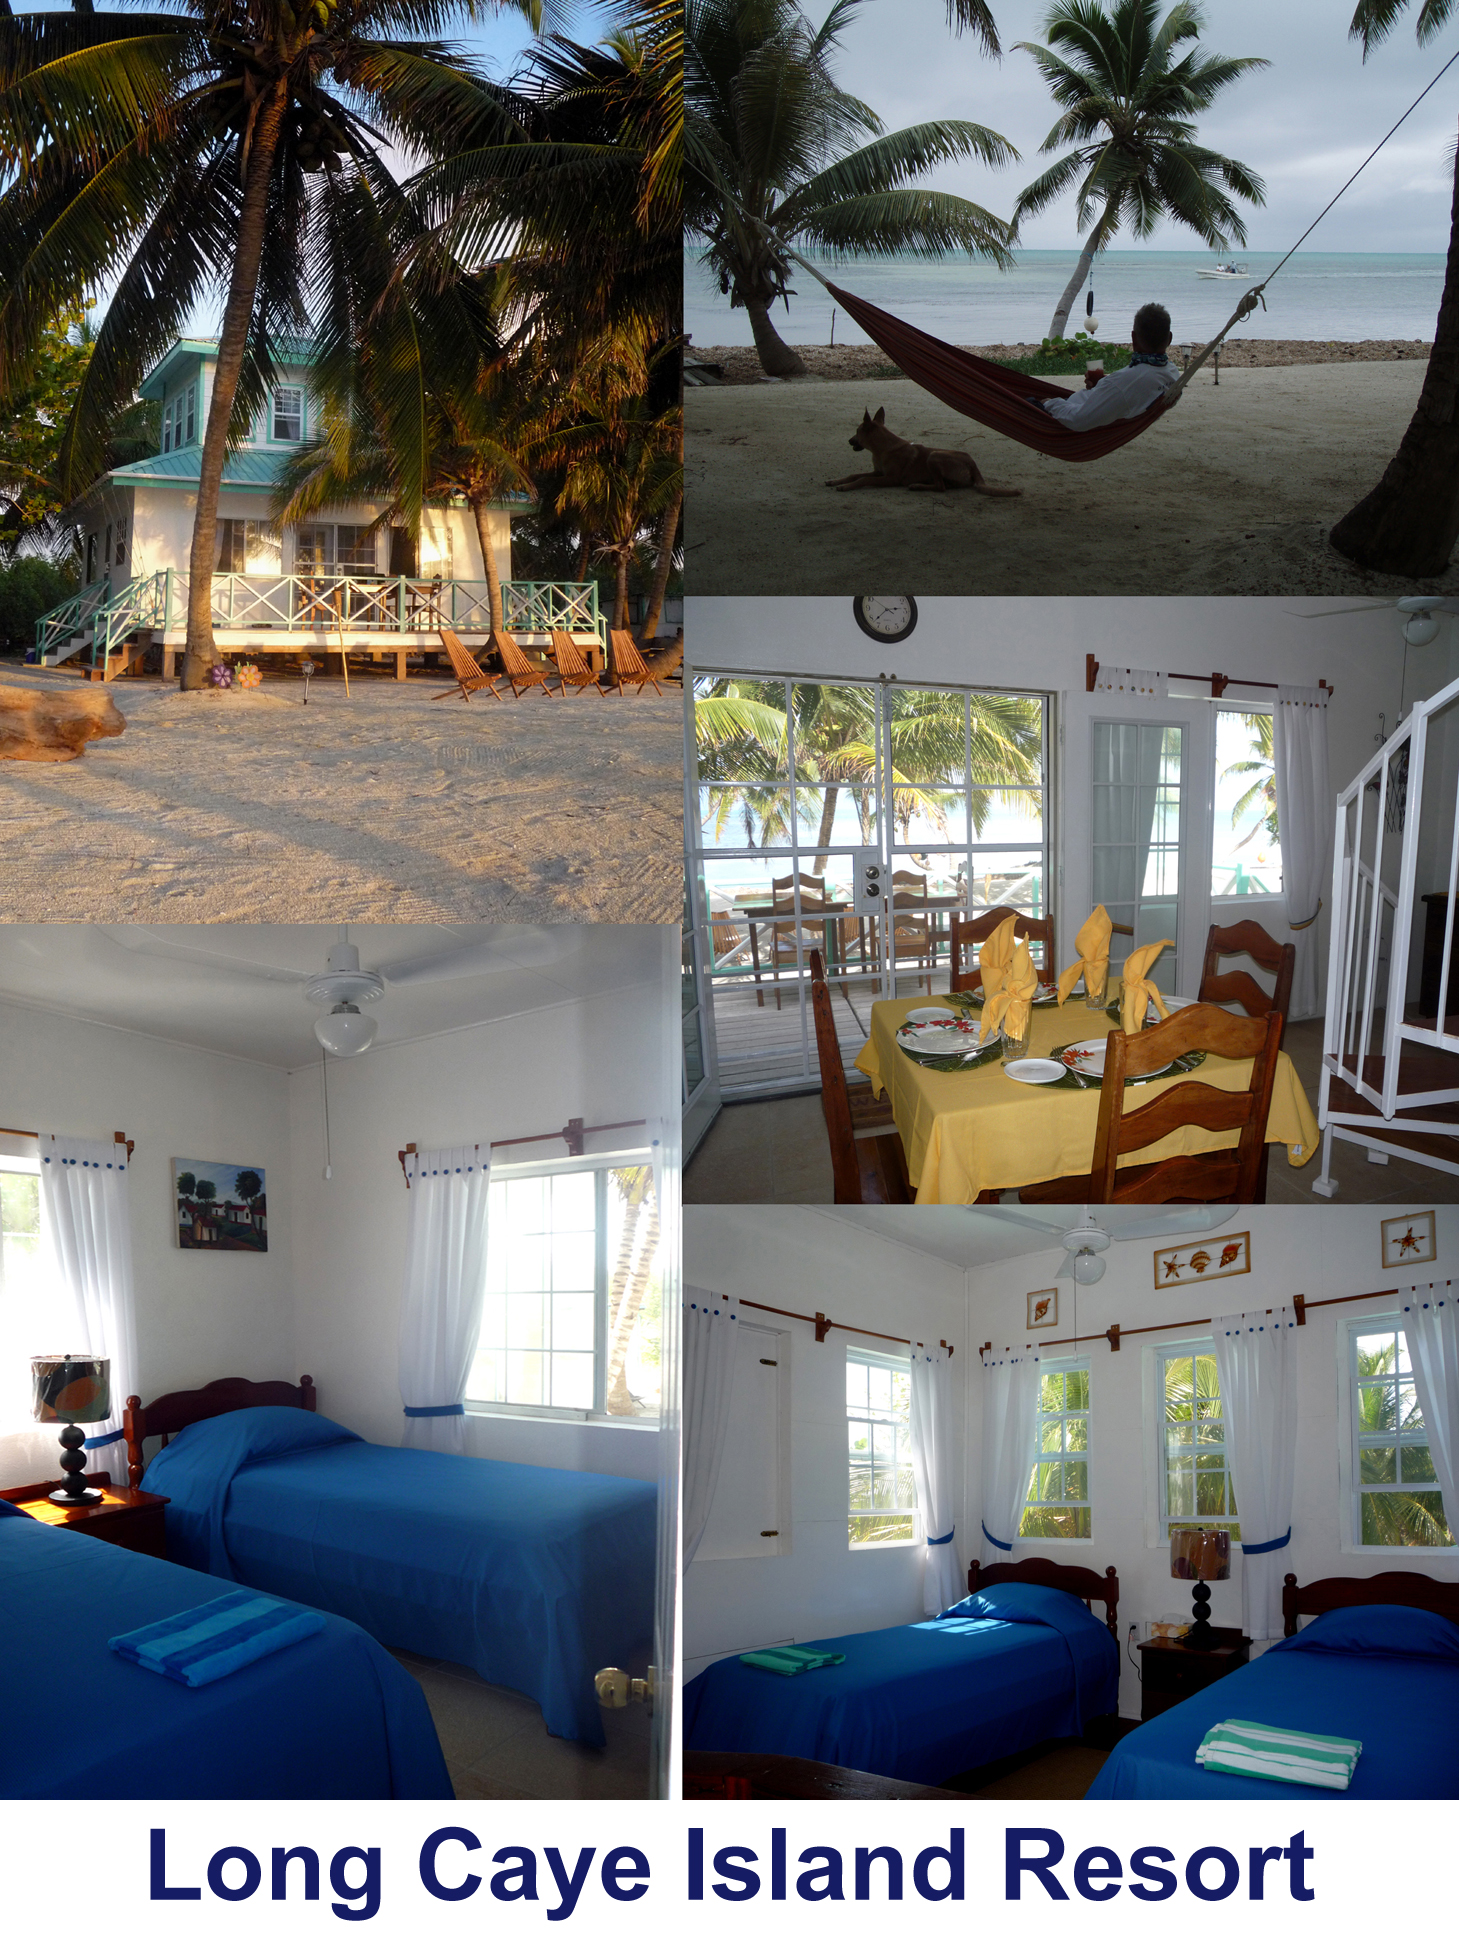 collage of images from Long Caye Island Resort